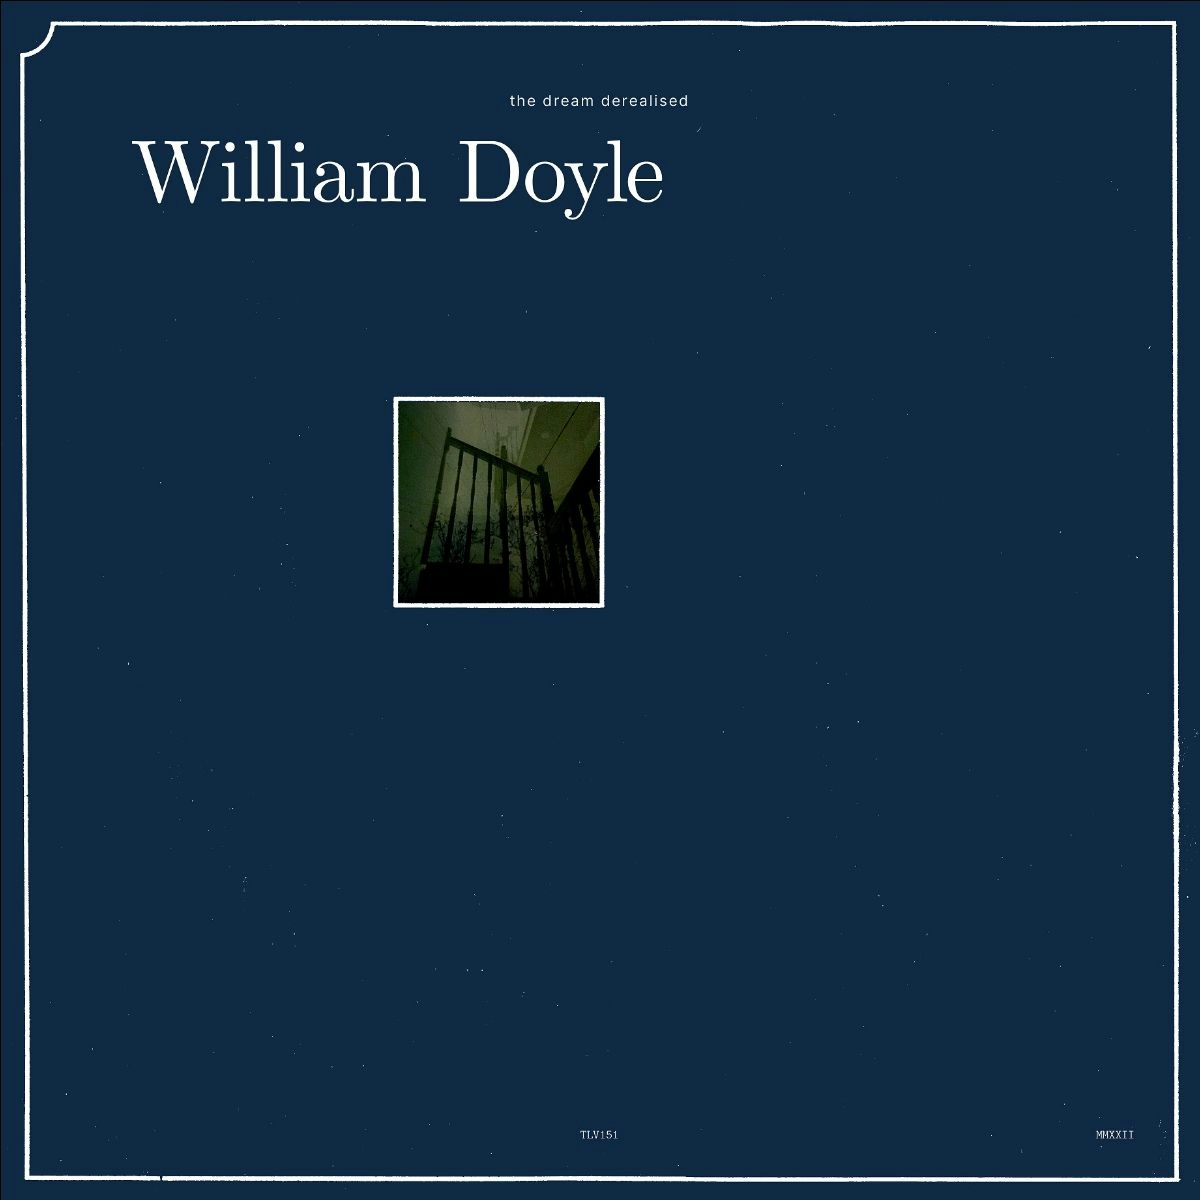 Album artwork for Album artwork for The Dream Derealised by William Doyle by The Dream Derealised - William Doyle